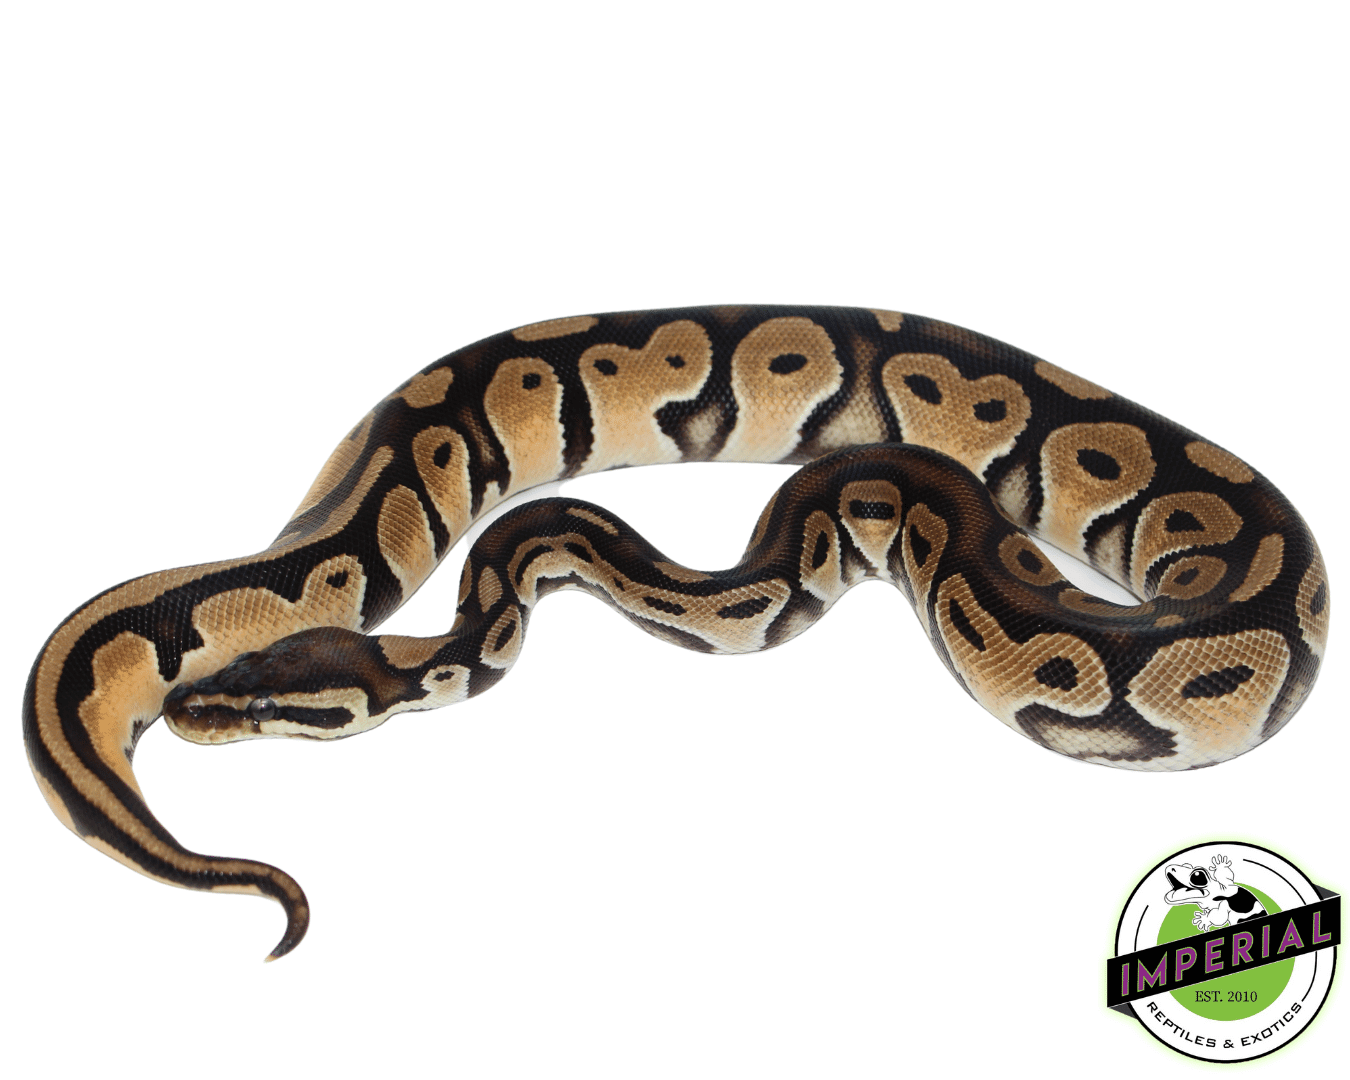 ball python for sale, buy reptiles online